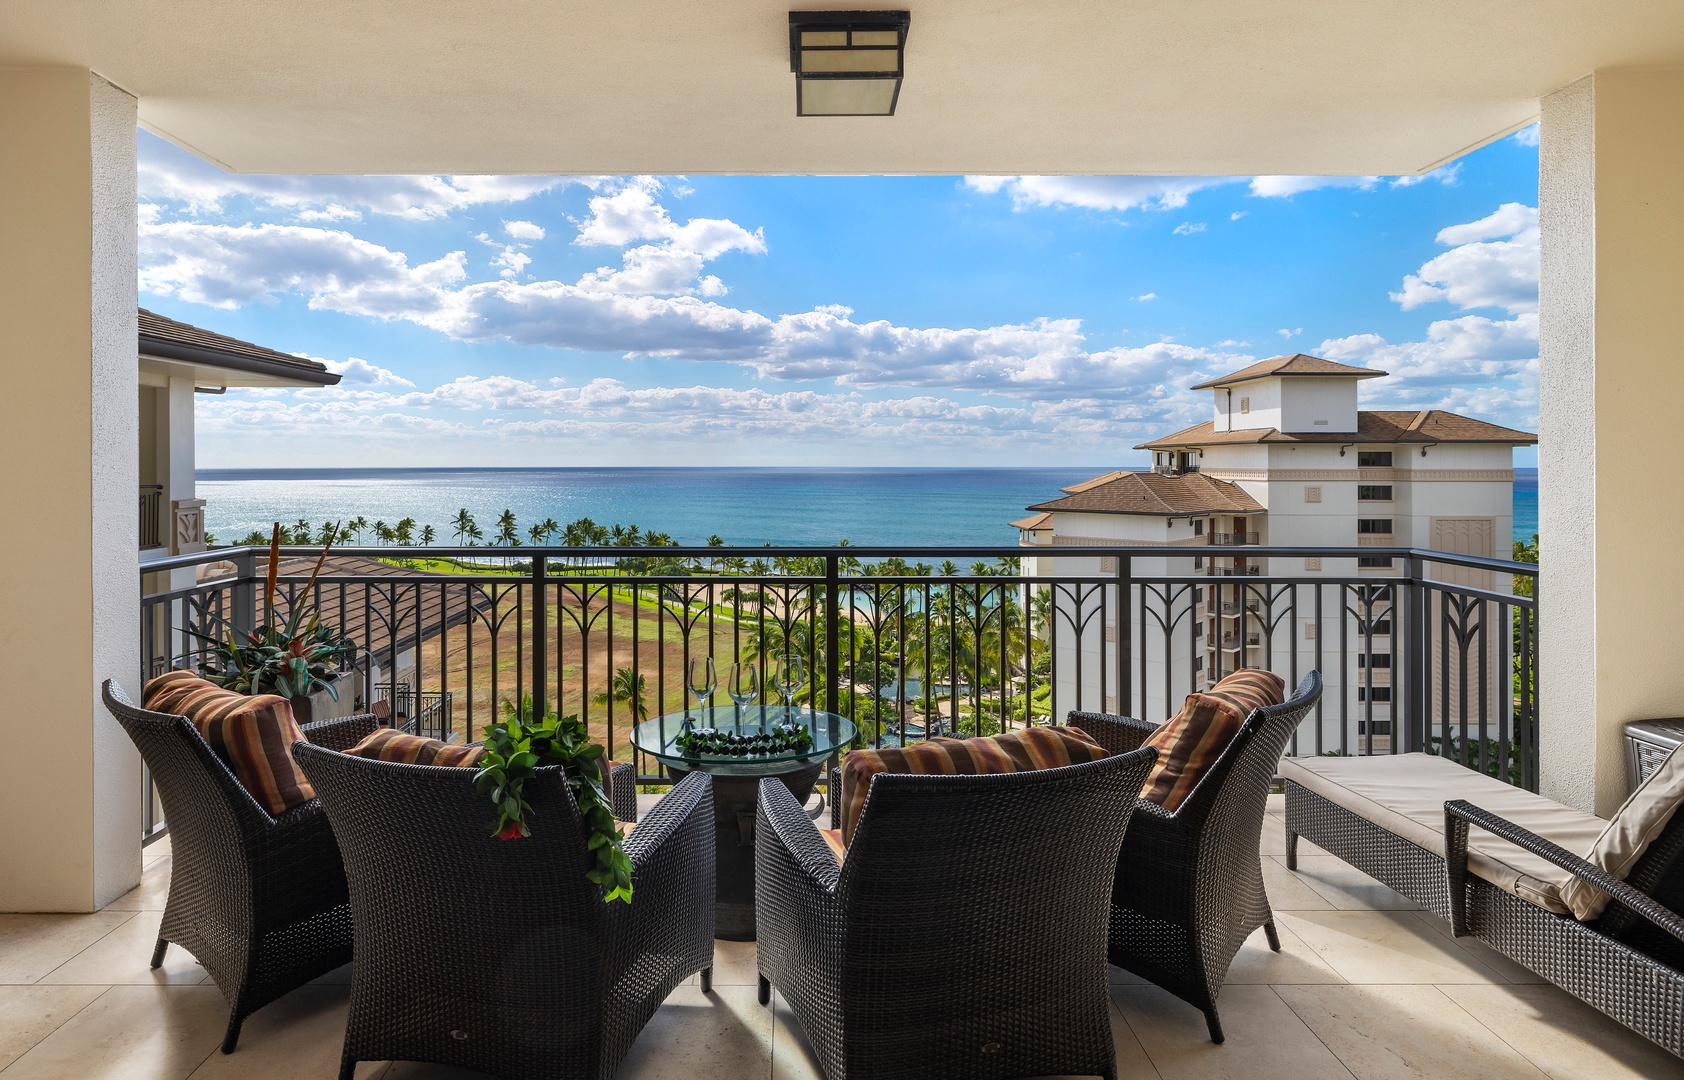 Kapolei Vacation Rentals, Ko Olina Beach Villas O1105 - The pacific views from your private lanai are endless, the perfect relaxing spot.